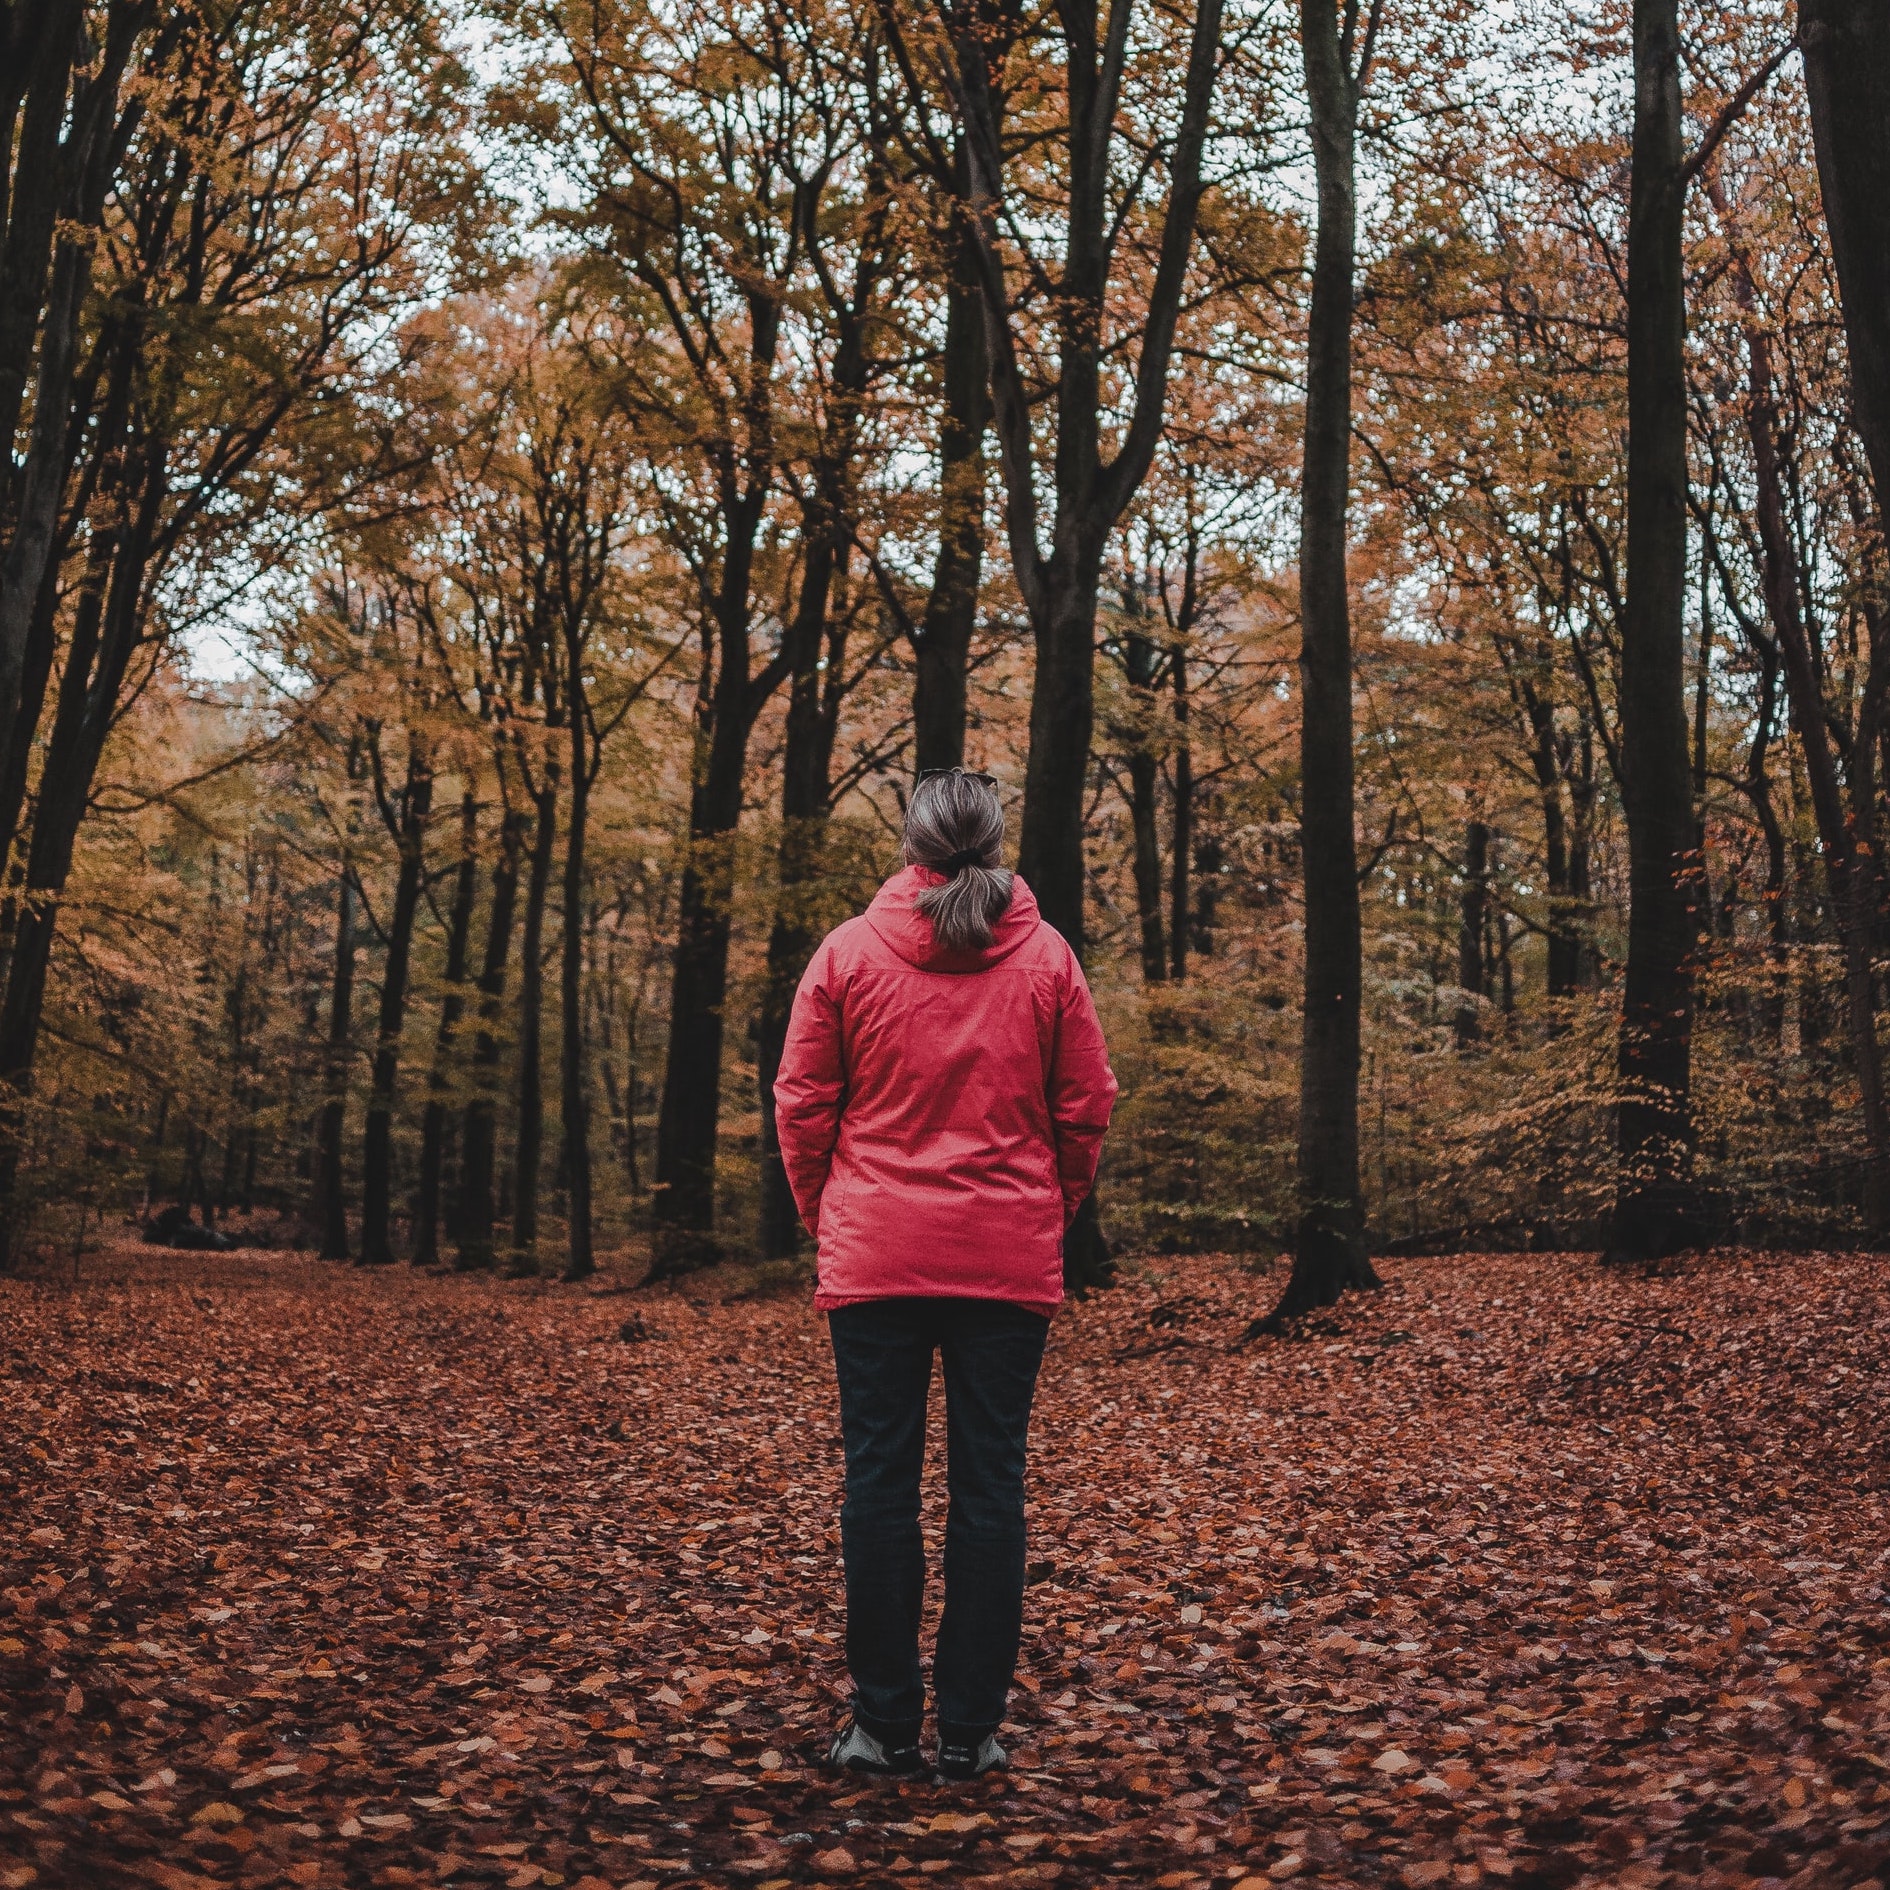 a woman stands along looking out at a forest in
       autumn